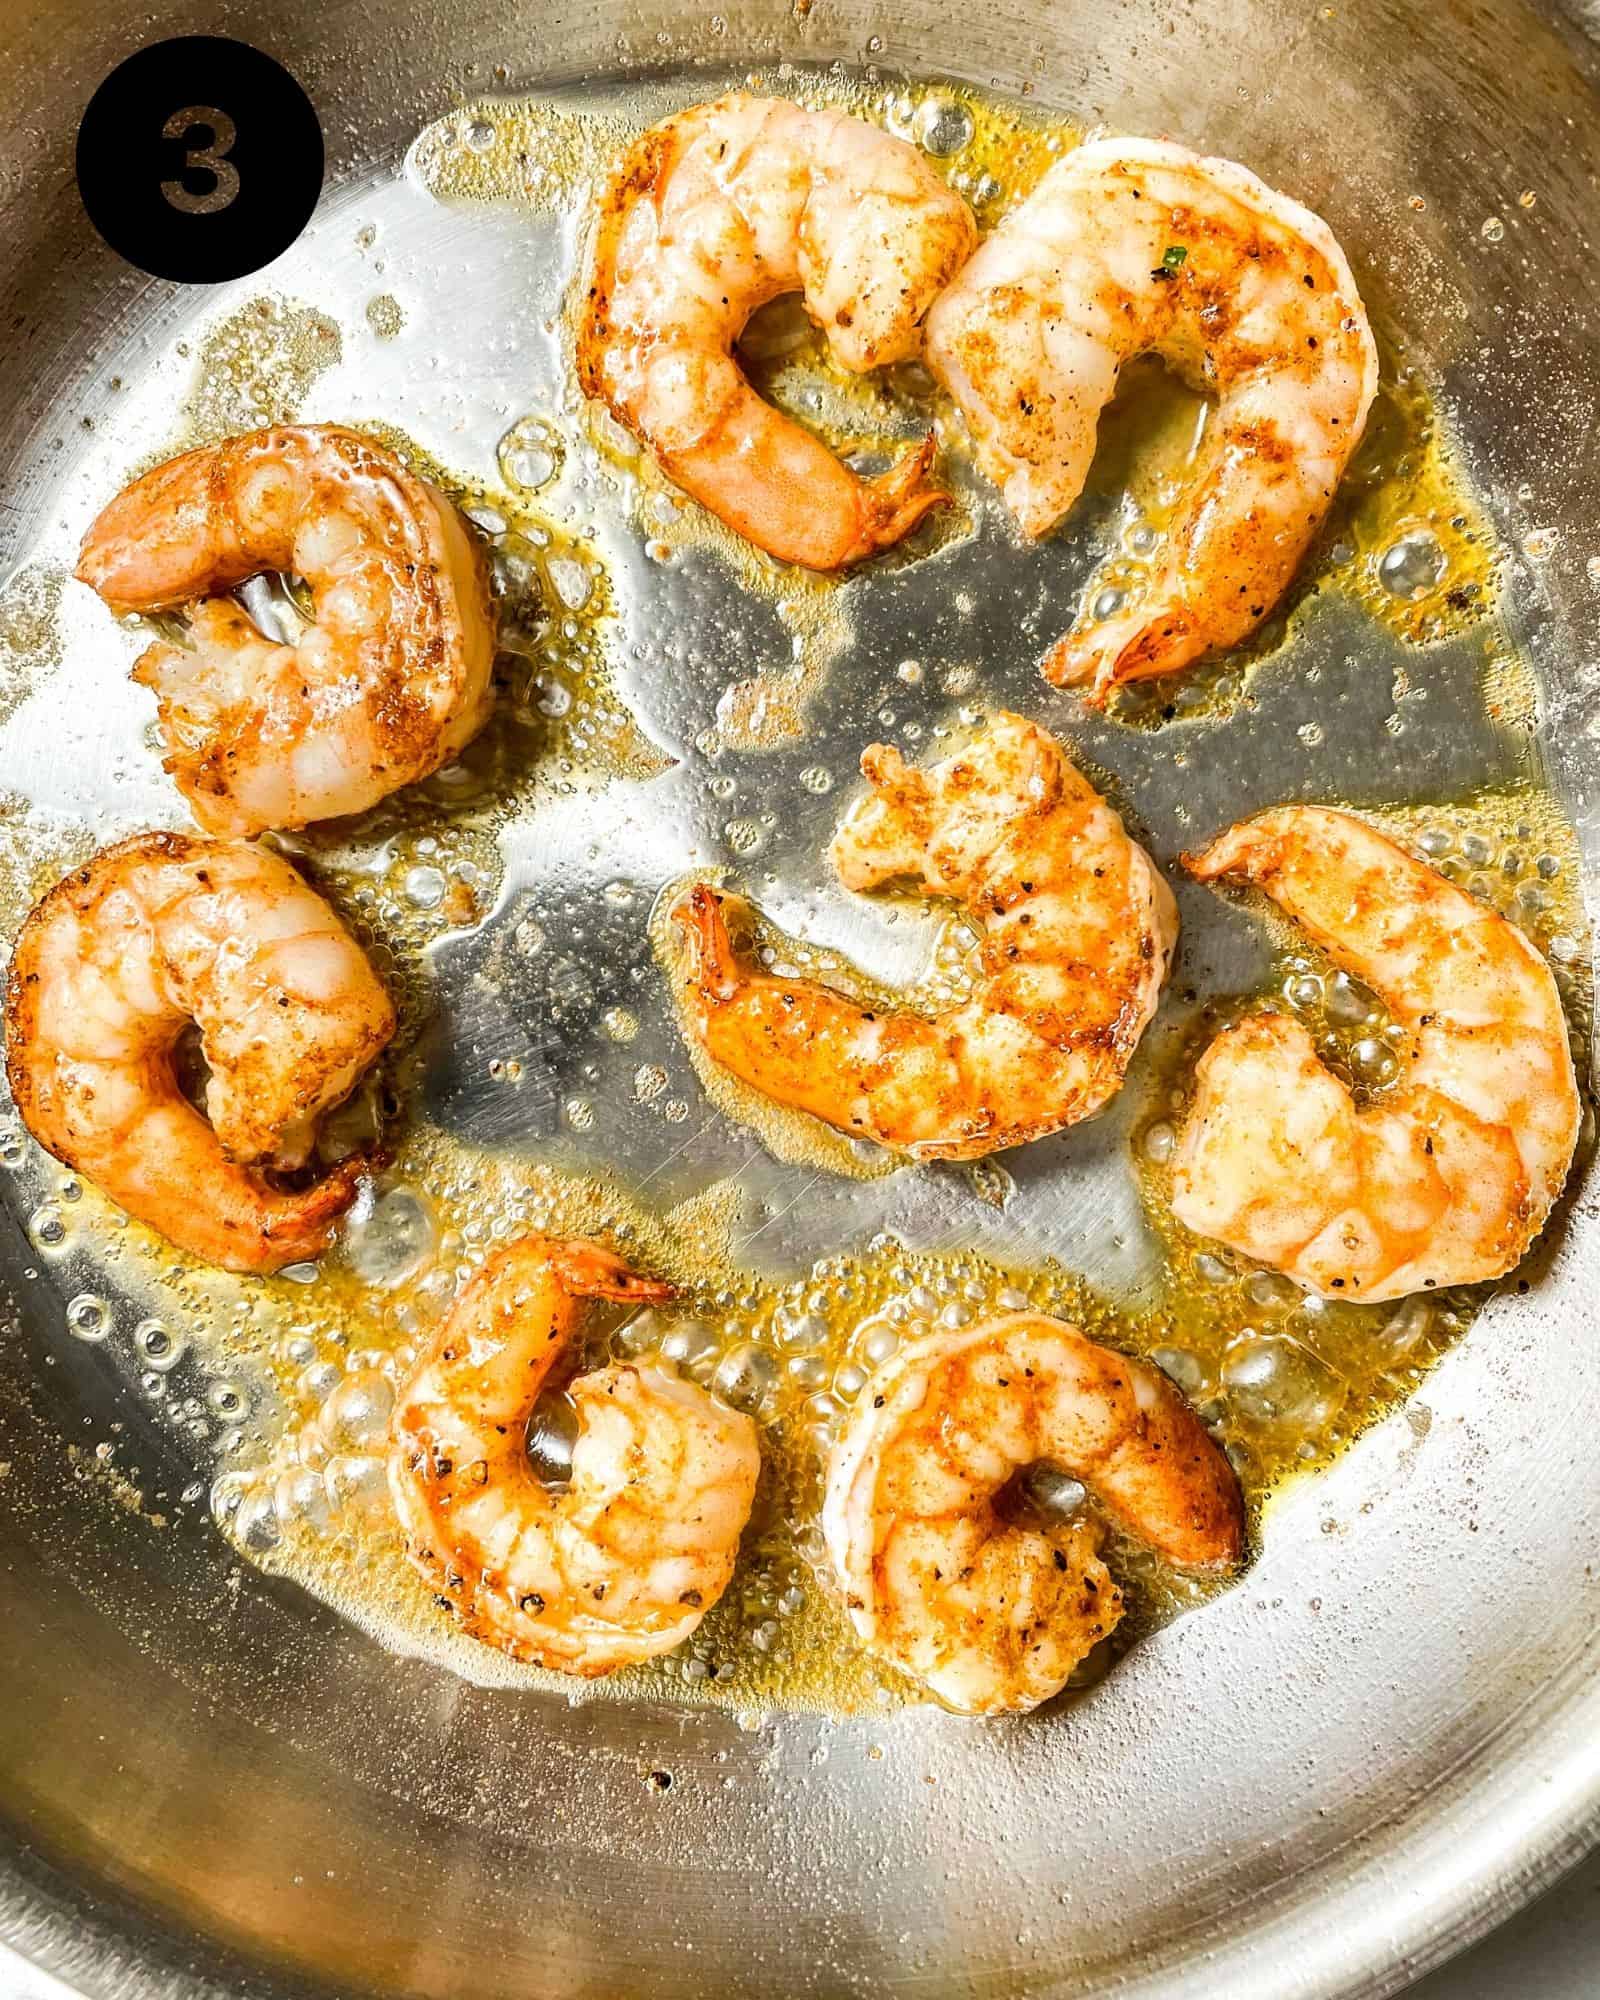 shrimp being cooked in a skillet.